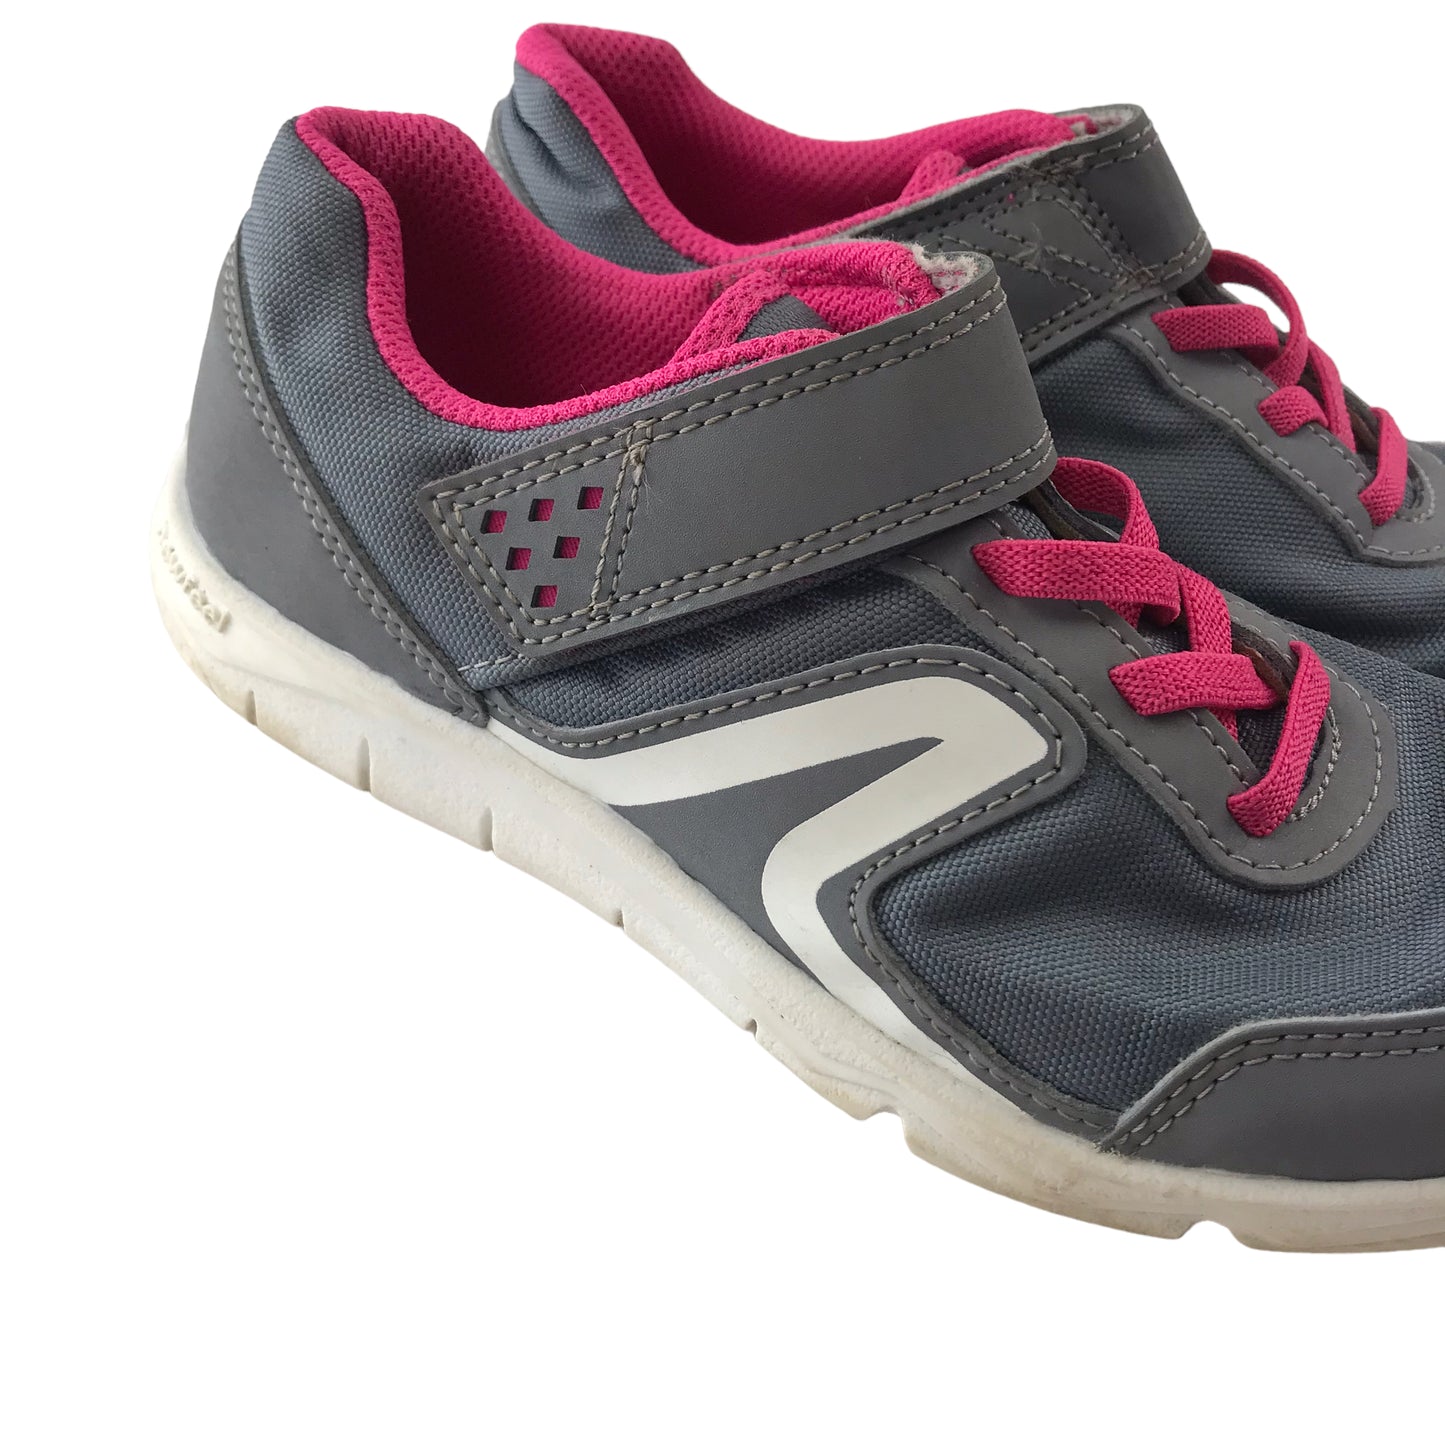 Decathlon Trainers Shoe Size 1.5 Grey Pink Lace